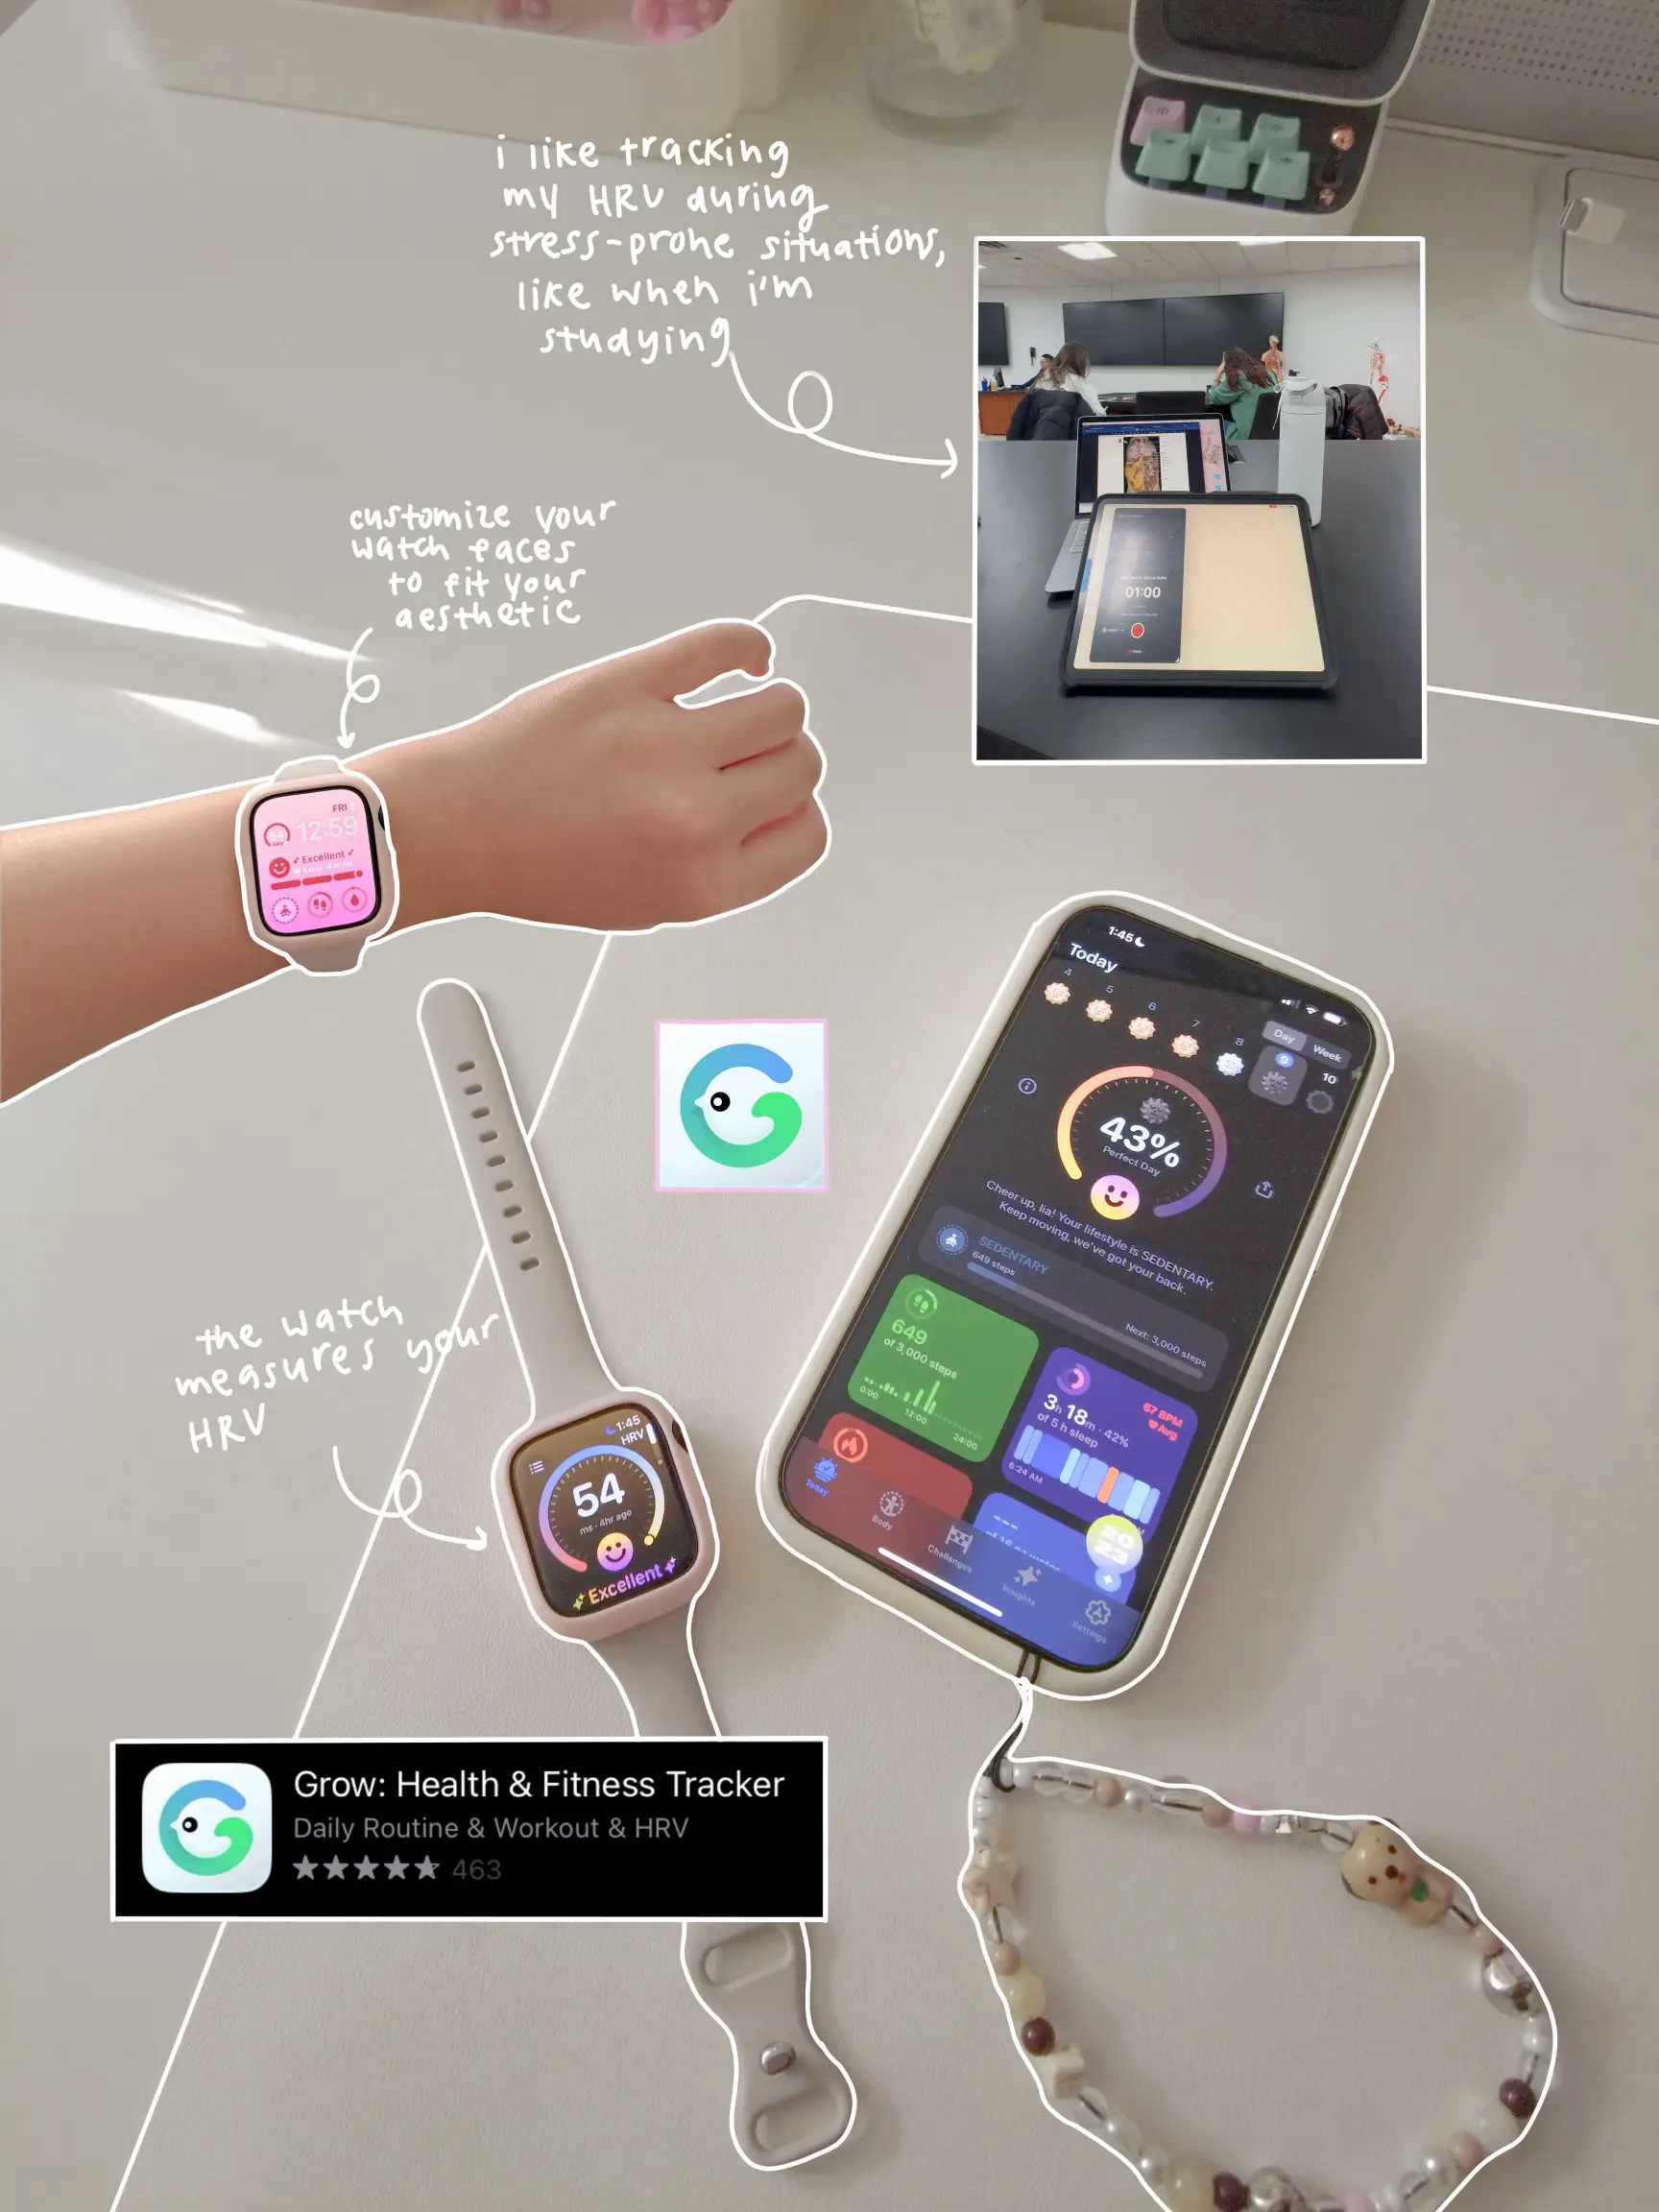 Sweating the small stuff: Smartwatch developed at UCLA measures